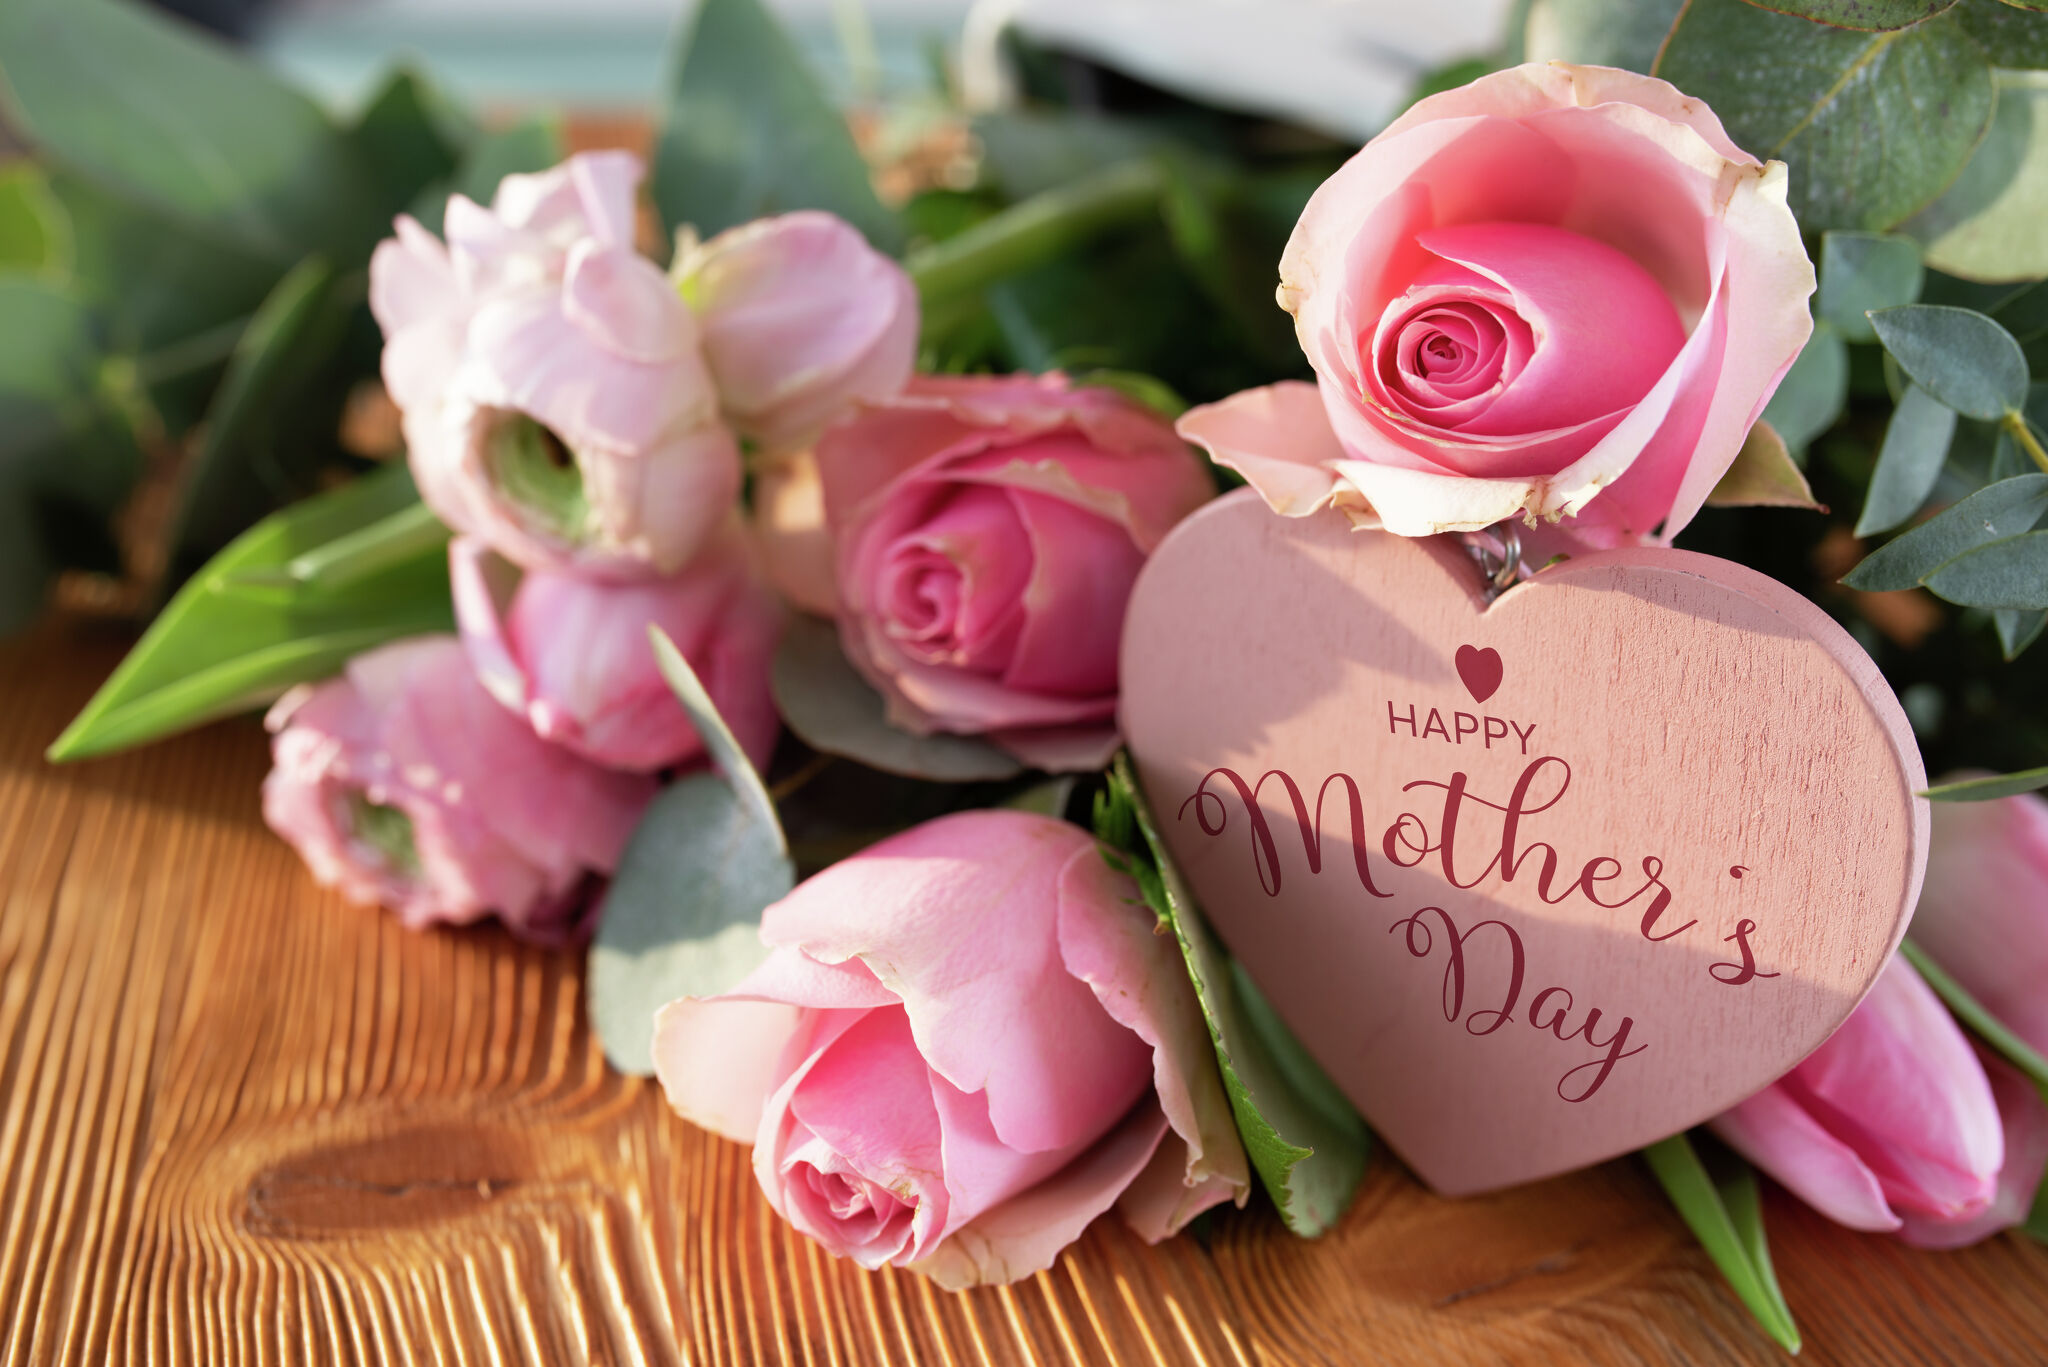 Read more about the article Moments in Petals: The Language of Affection through Thoughtful Mother’s Day Flowers